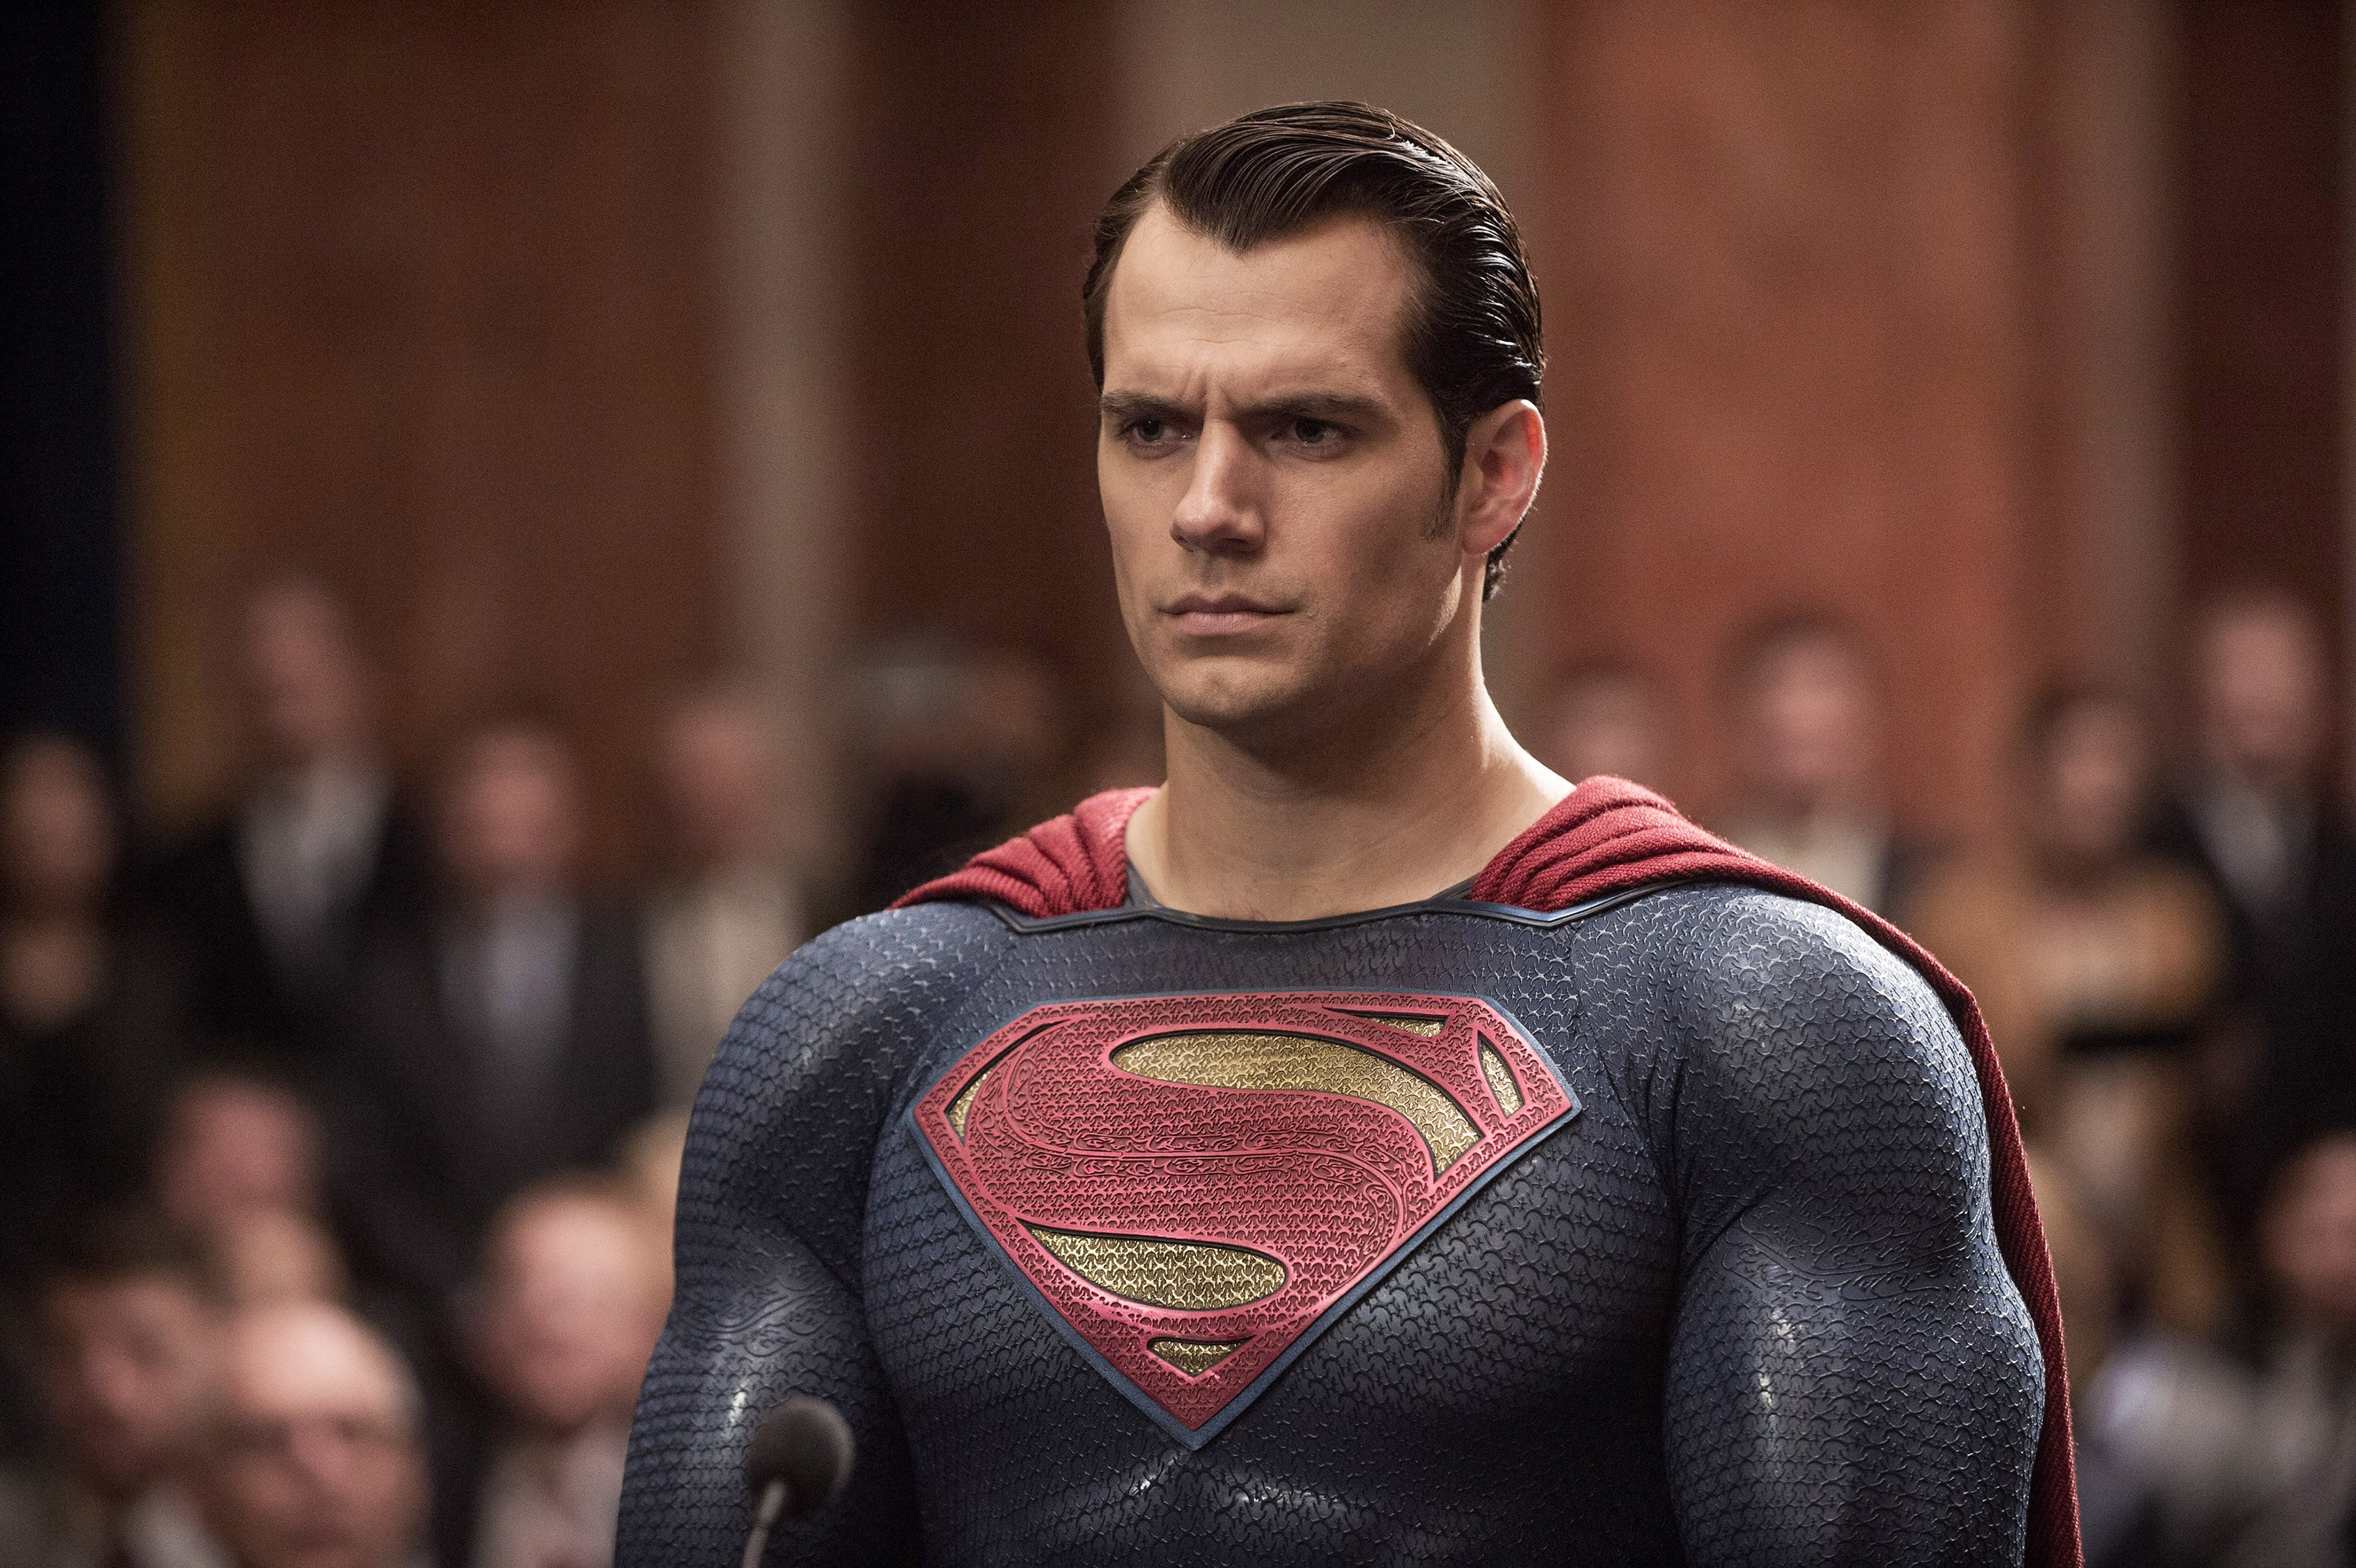 Henry Cavill is definitely, actually, not going to play Superman anymore